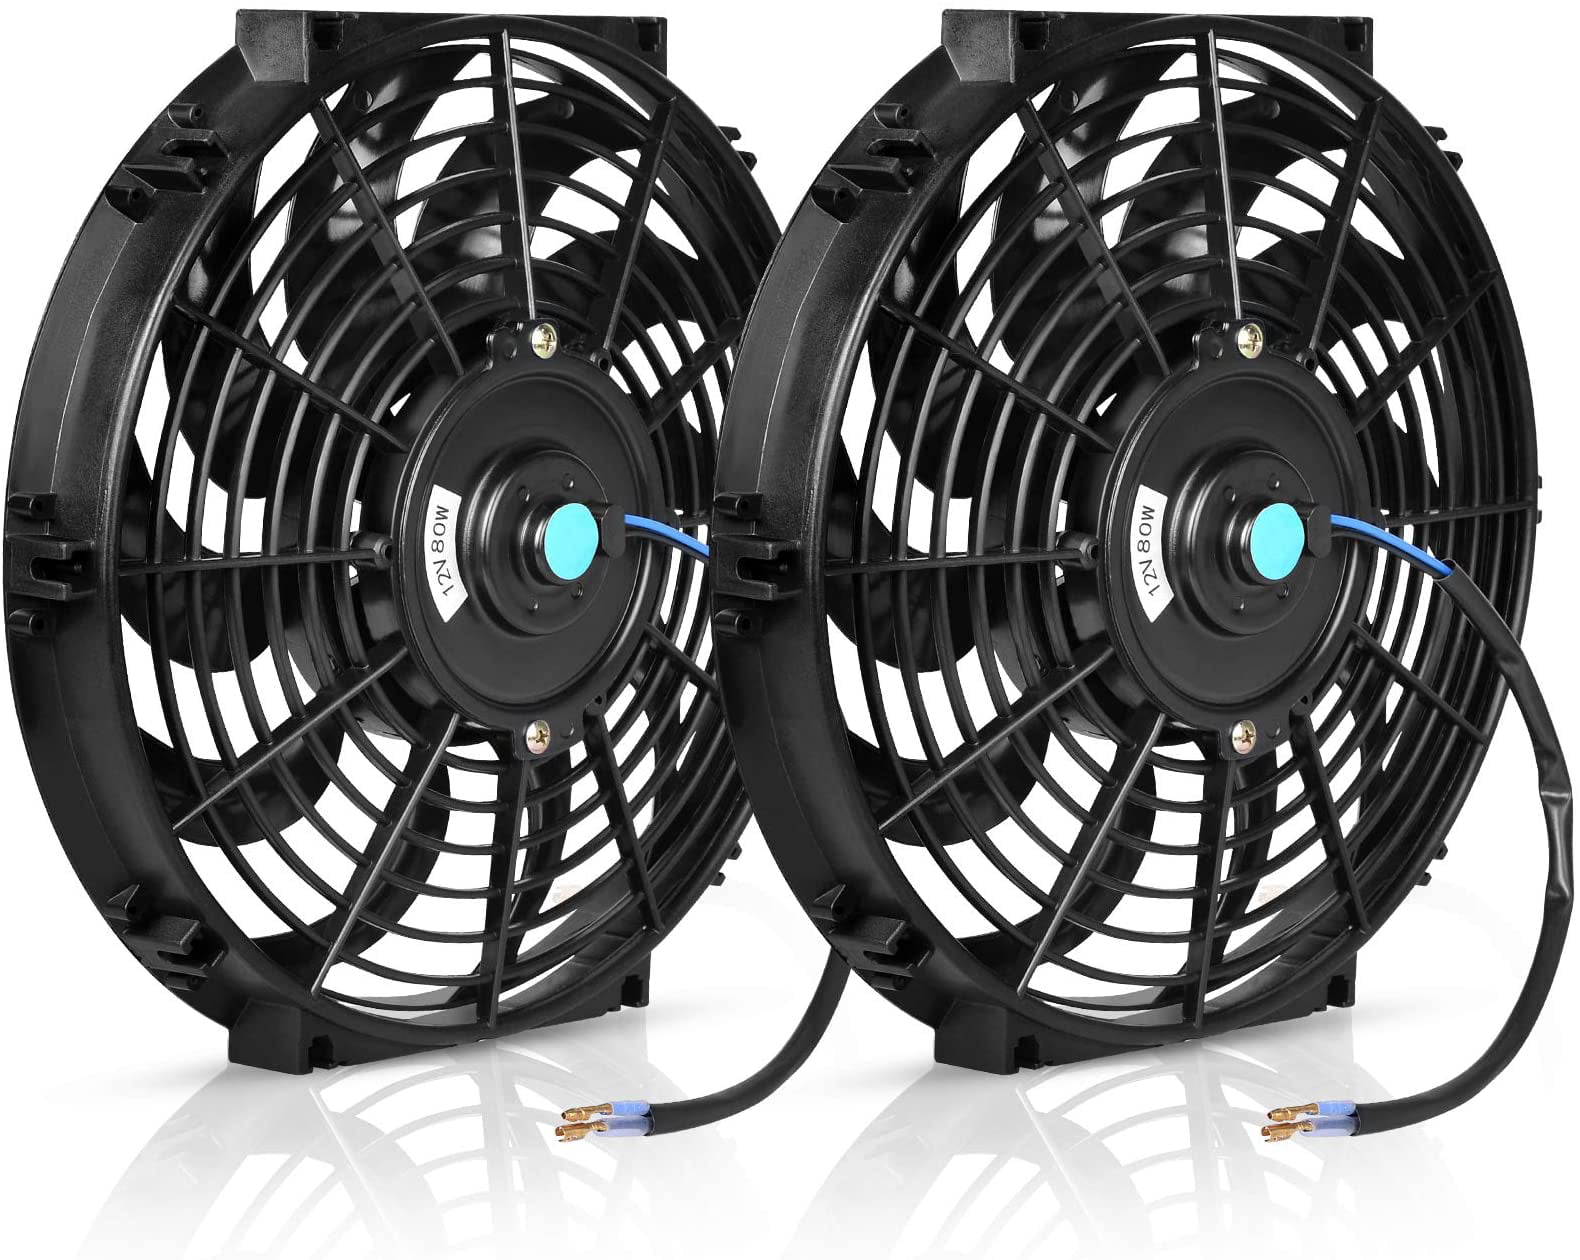 12 High Performance Electric Radiator Cooling Fan Push Pull Slim 12V 80W 1550 CFM with Mounting Kit（Diameter 11.73 Depth 2.56 Pack of 2